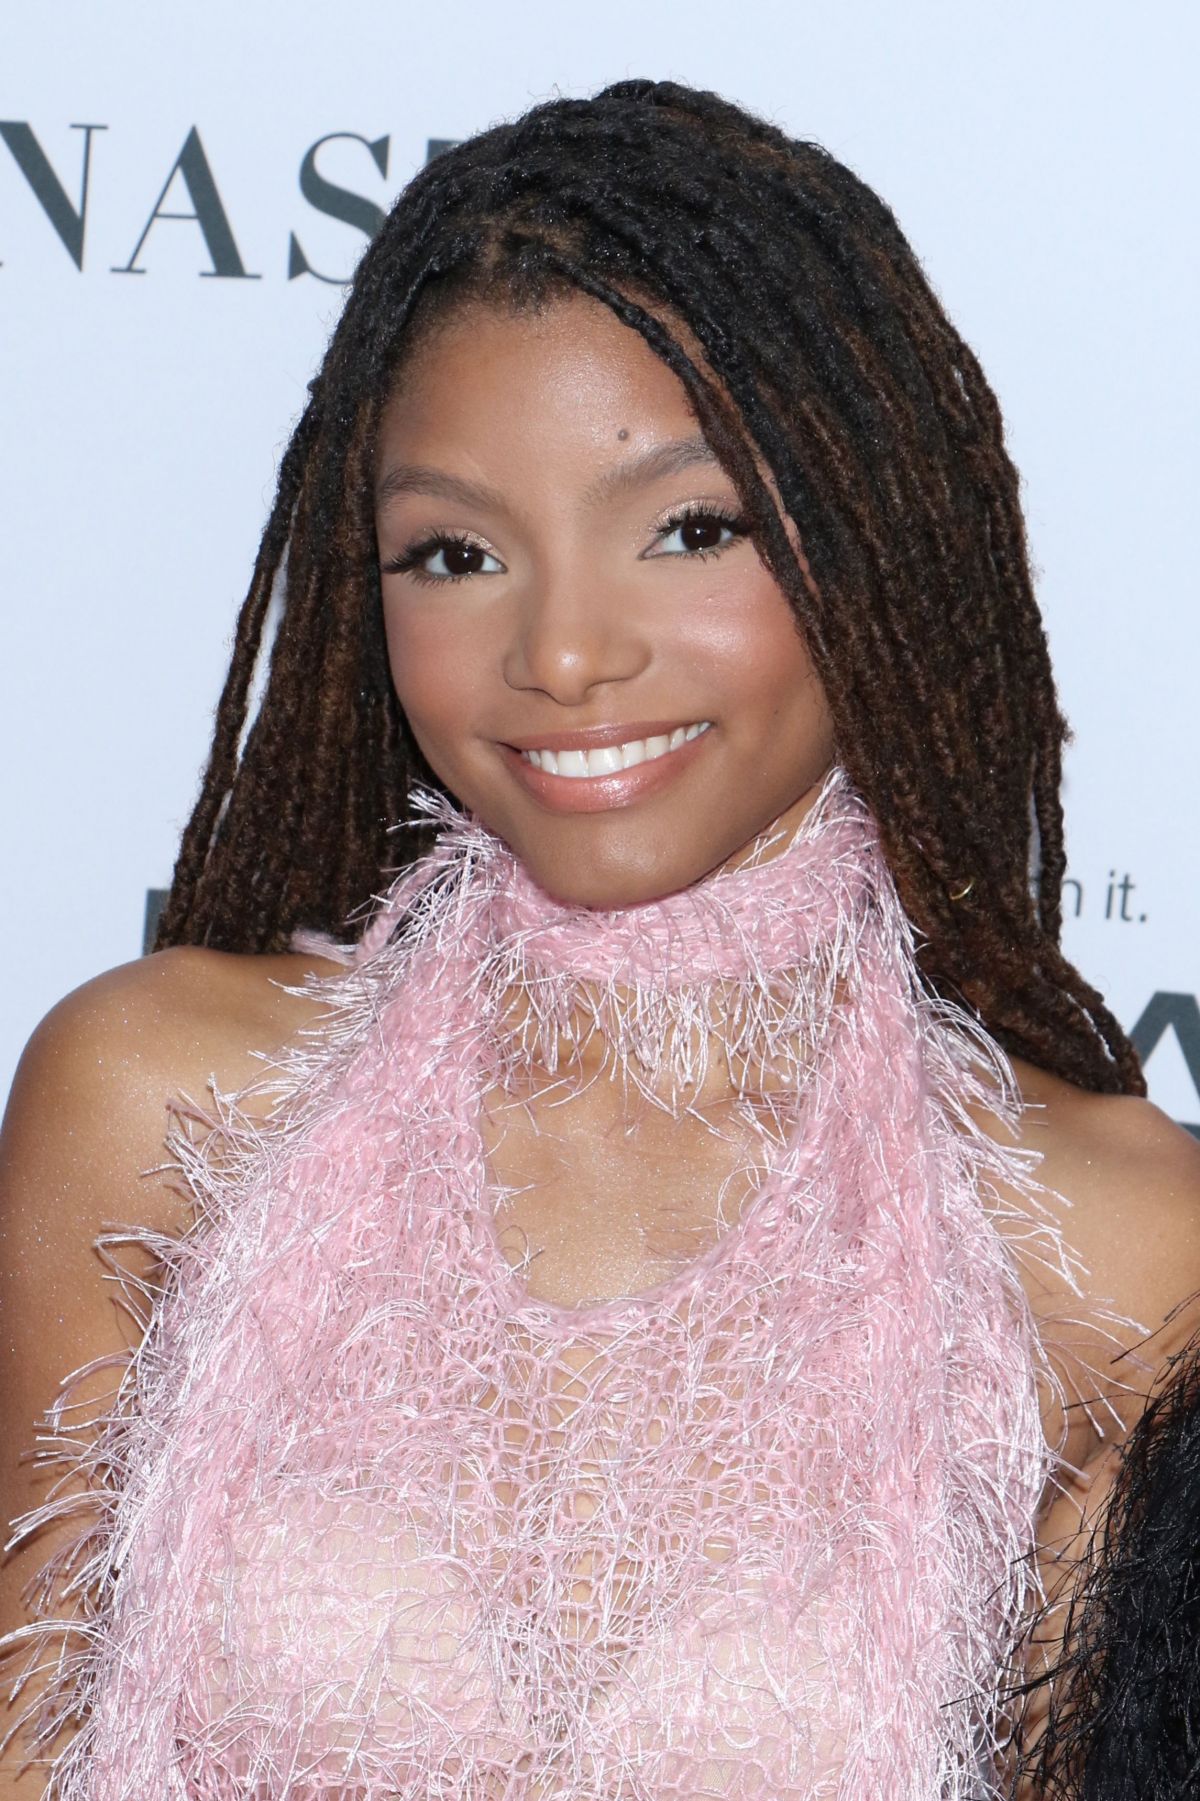 chloe-and-halle-bailey-at-glamour-women-of-the-year-summit-in-new-york-11-13-2017-2.jpg